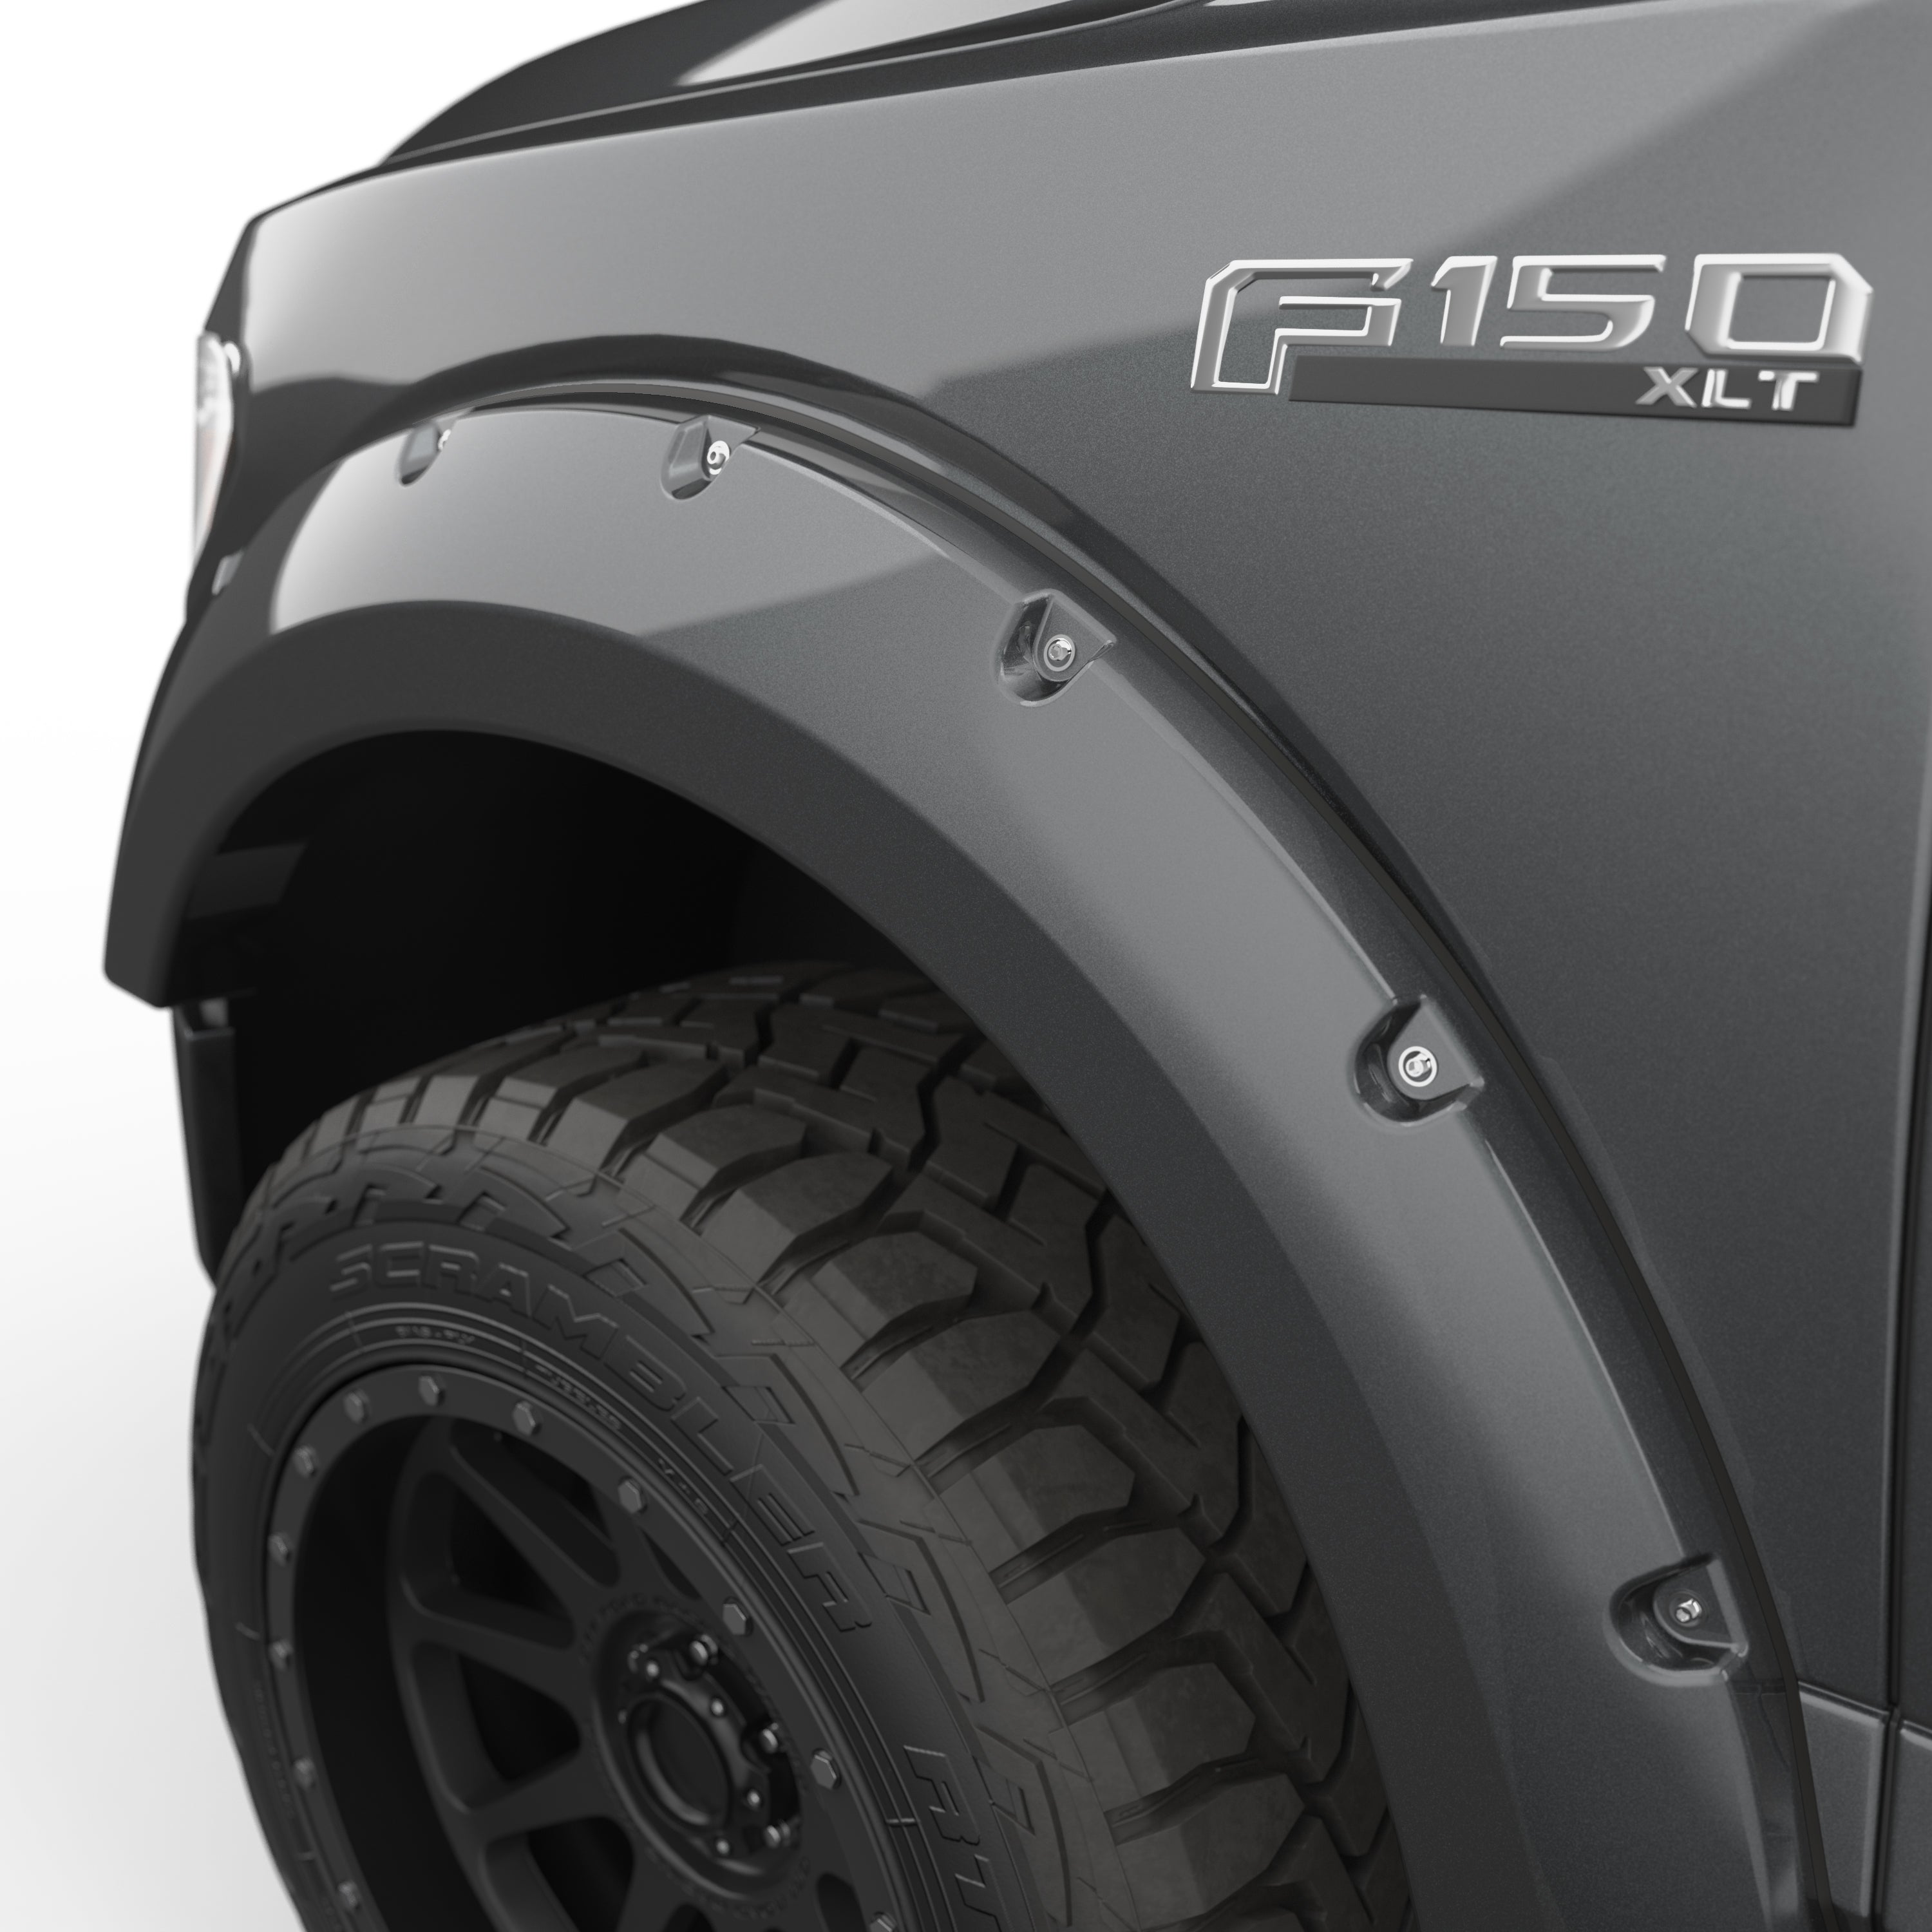 EGR 2018-2020 Ford F-150 2 & 4 Door Crew Cab Standard Cab Extended Cab Pickup Traditional Bolt-on look Fender Flares set of 4 Painted to Code Magnetic 793574-J7